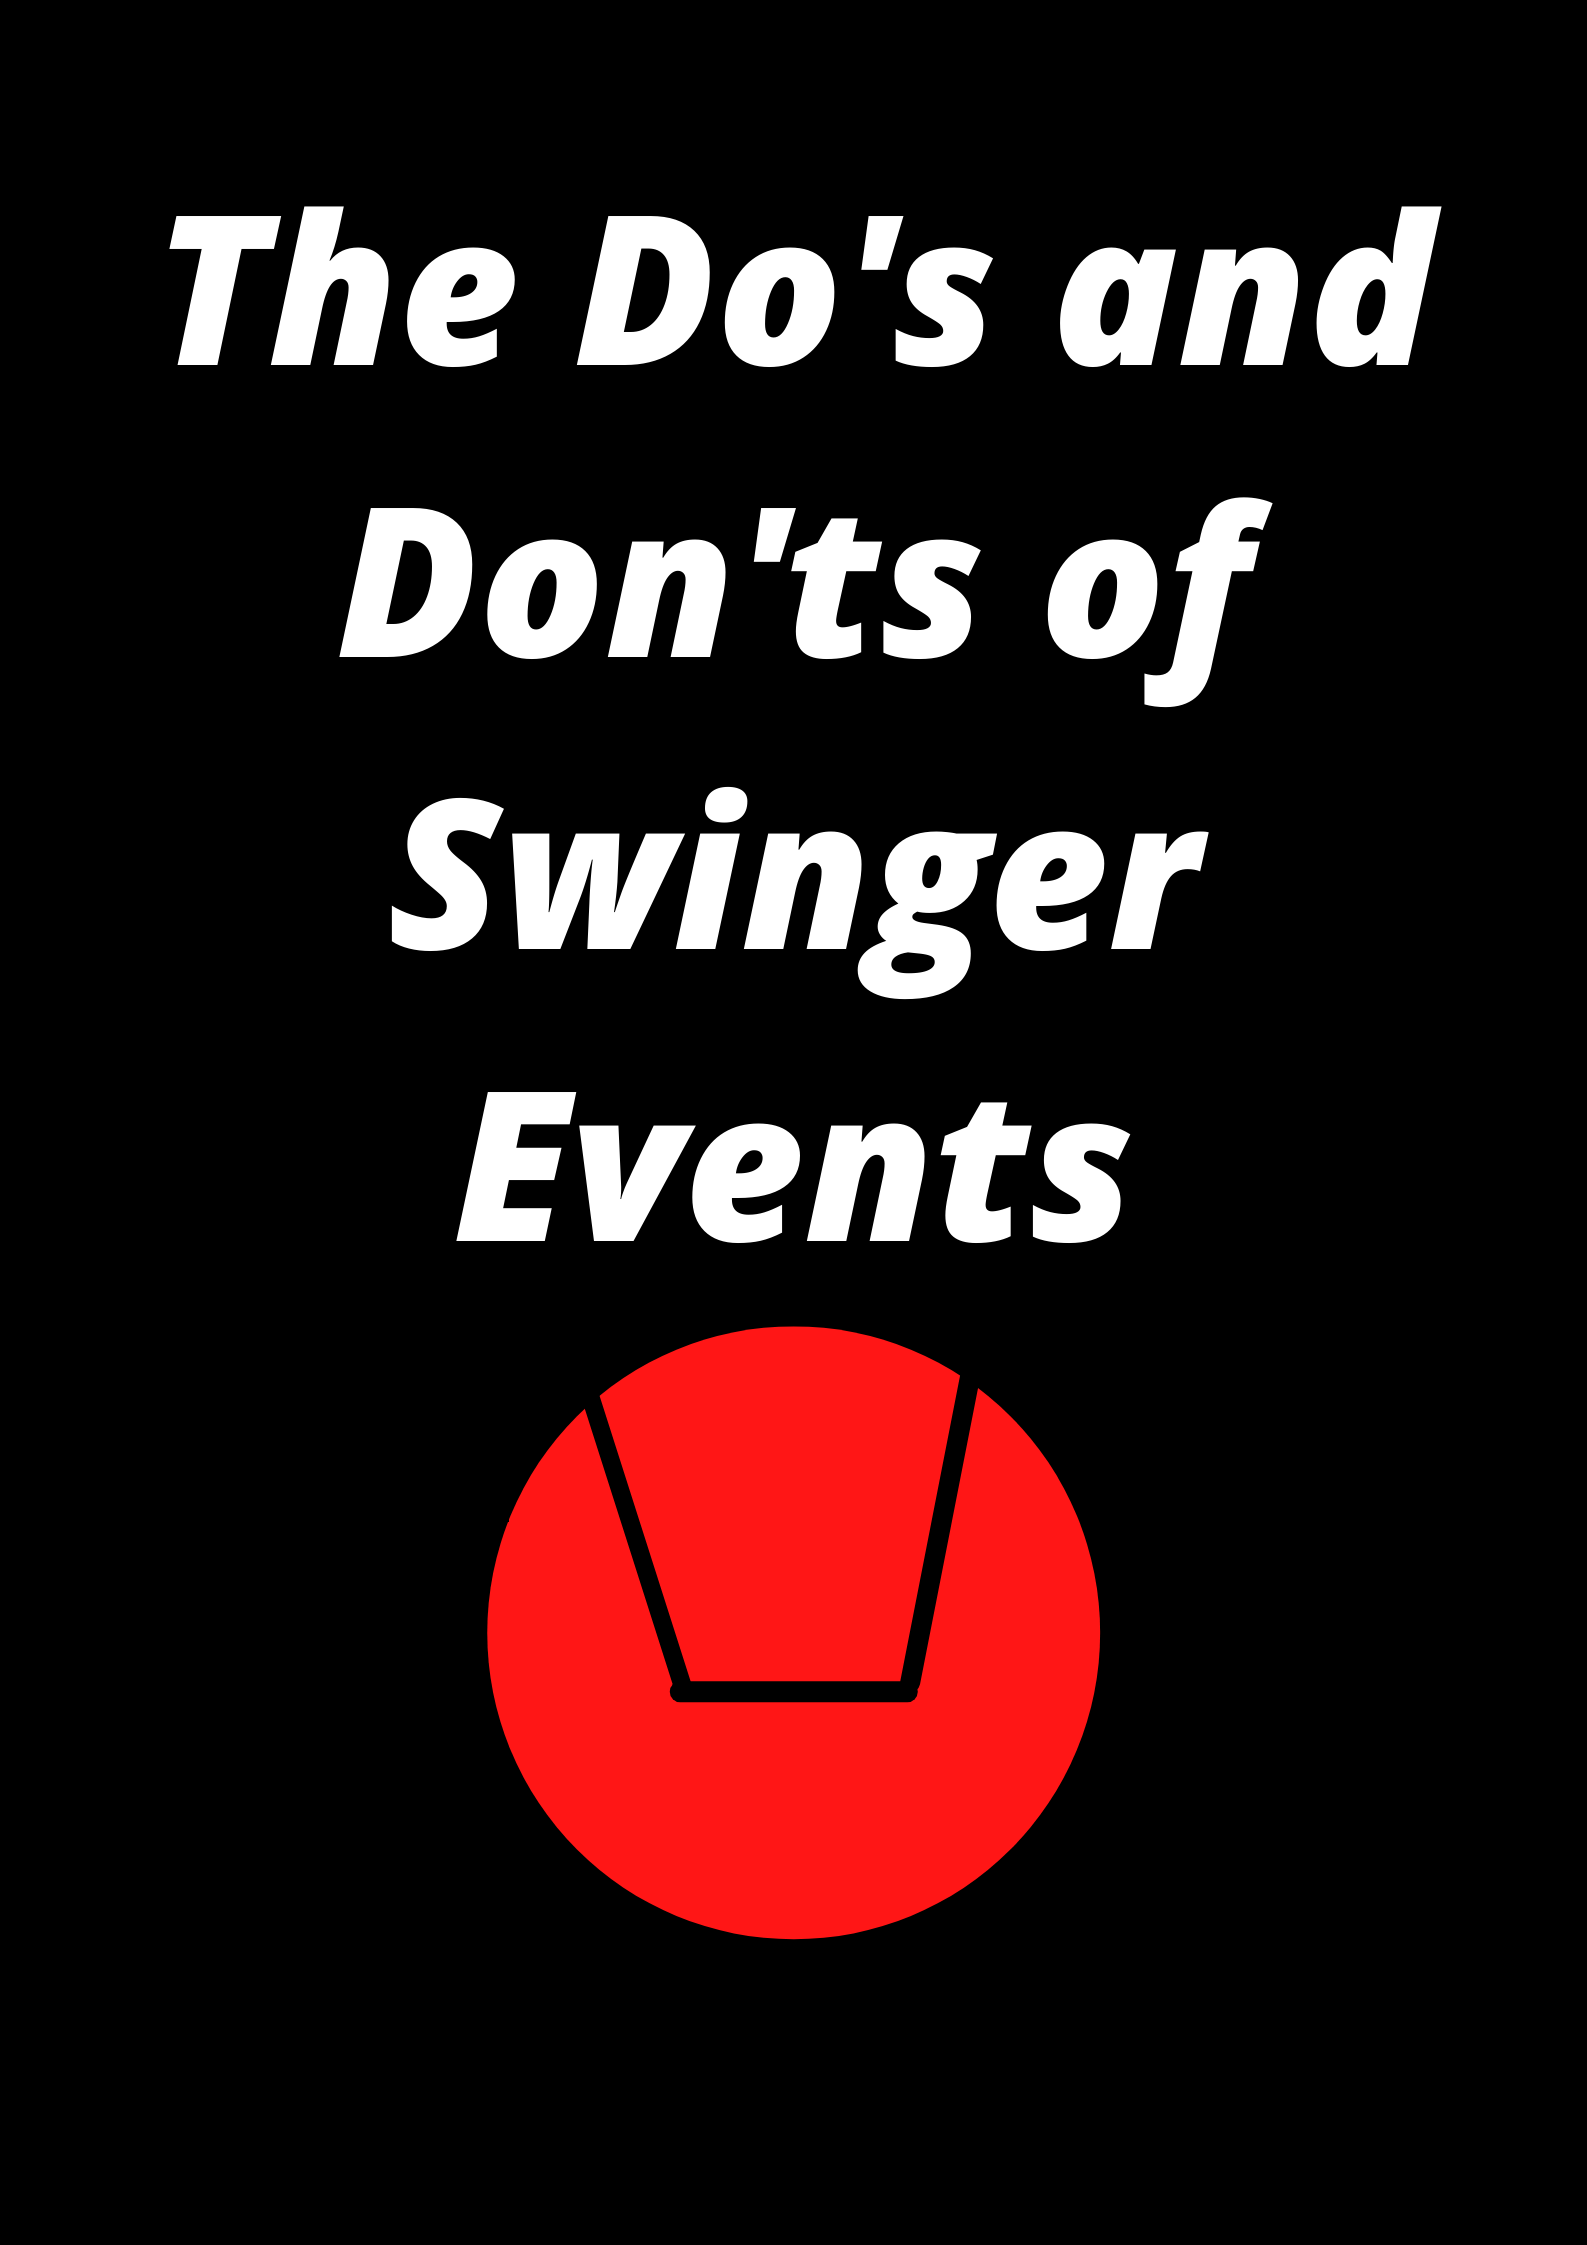 Rules of Swinger Events